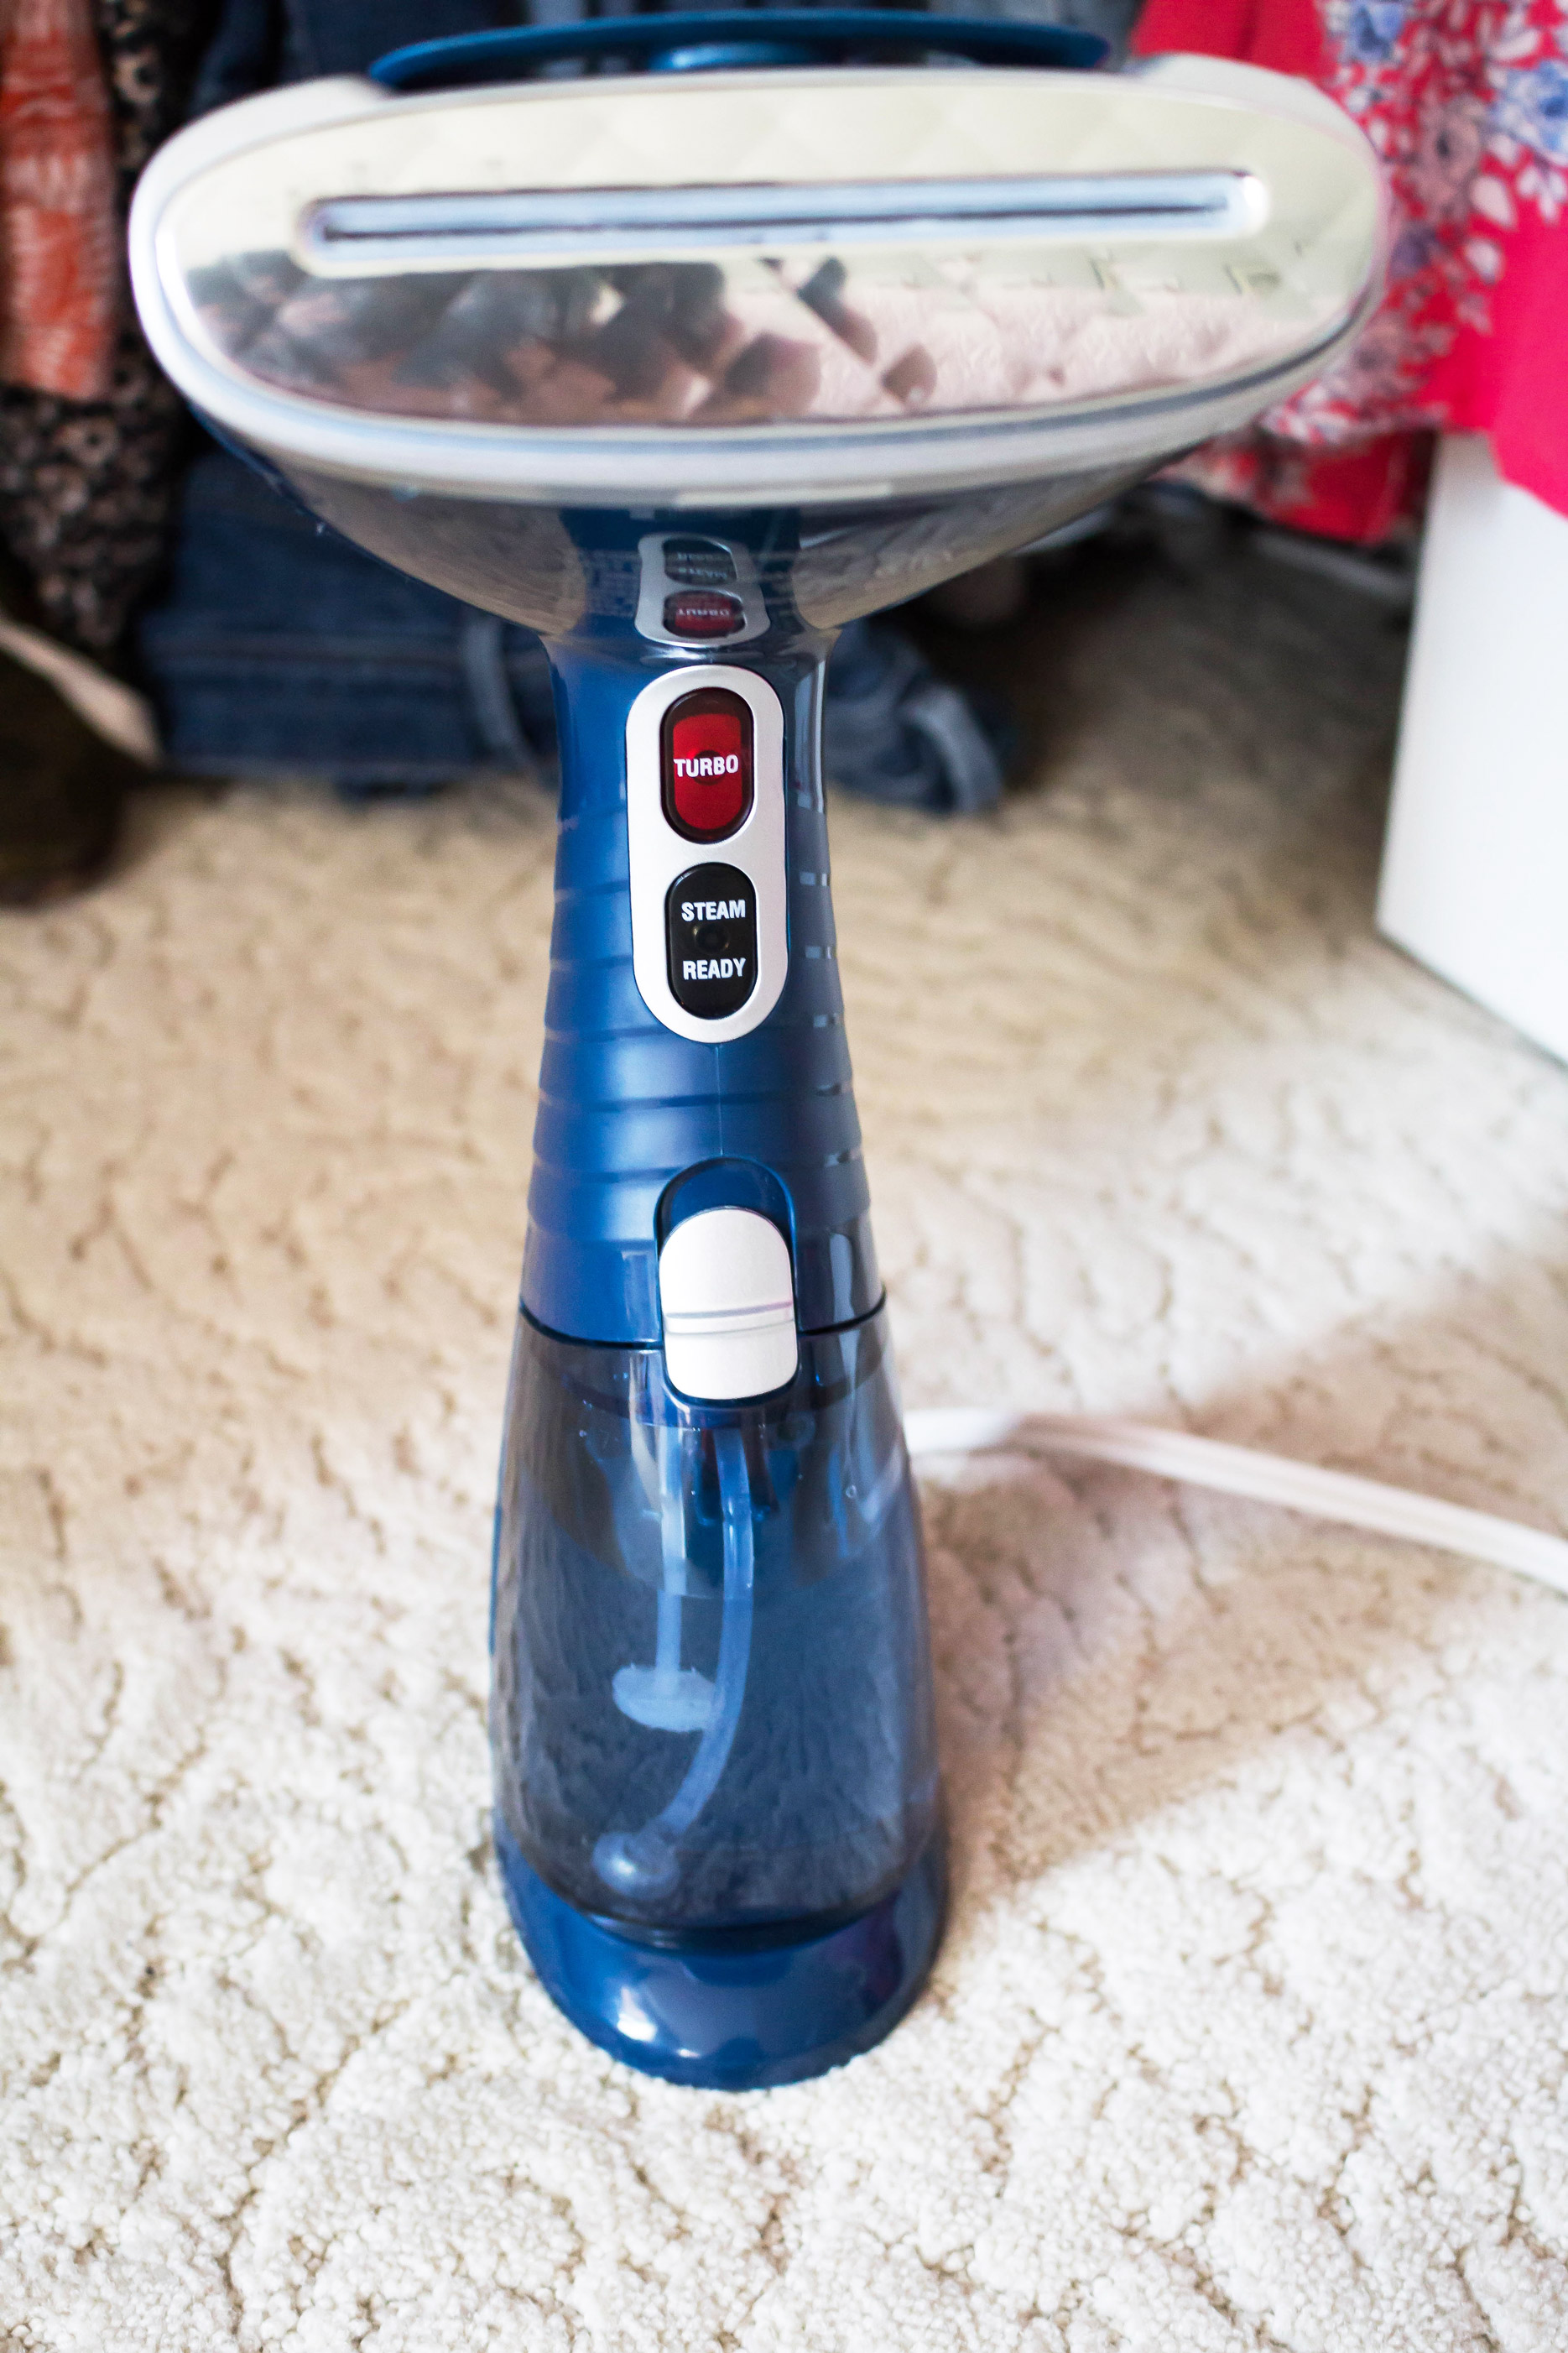 Review: Conair Turbo ExtremeSteam Handheld Fabric Steamer